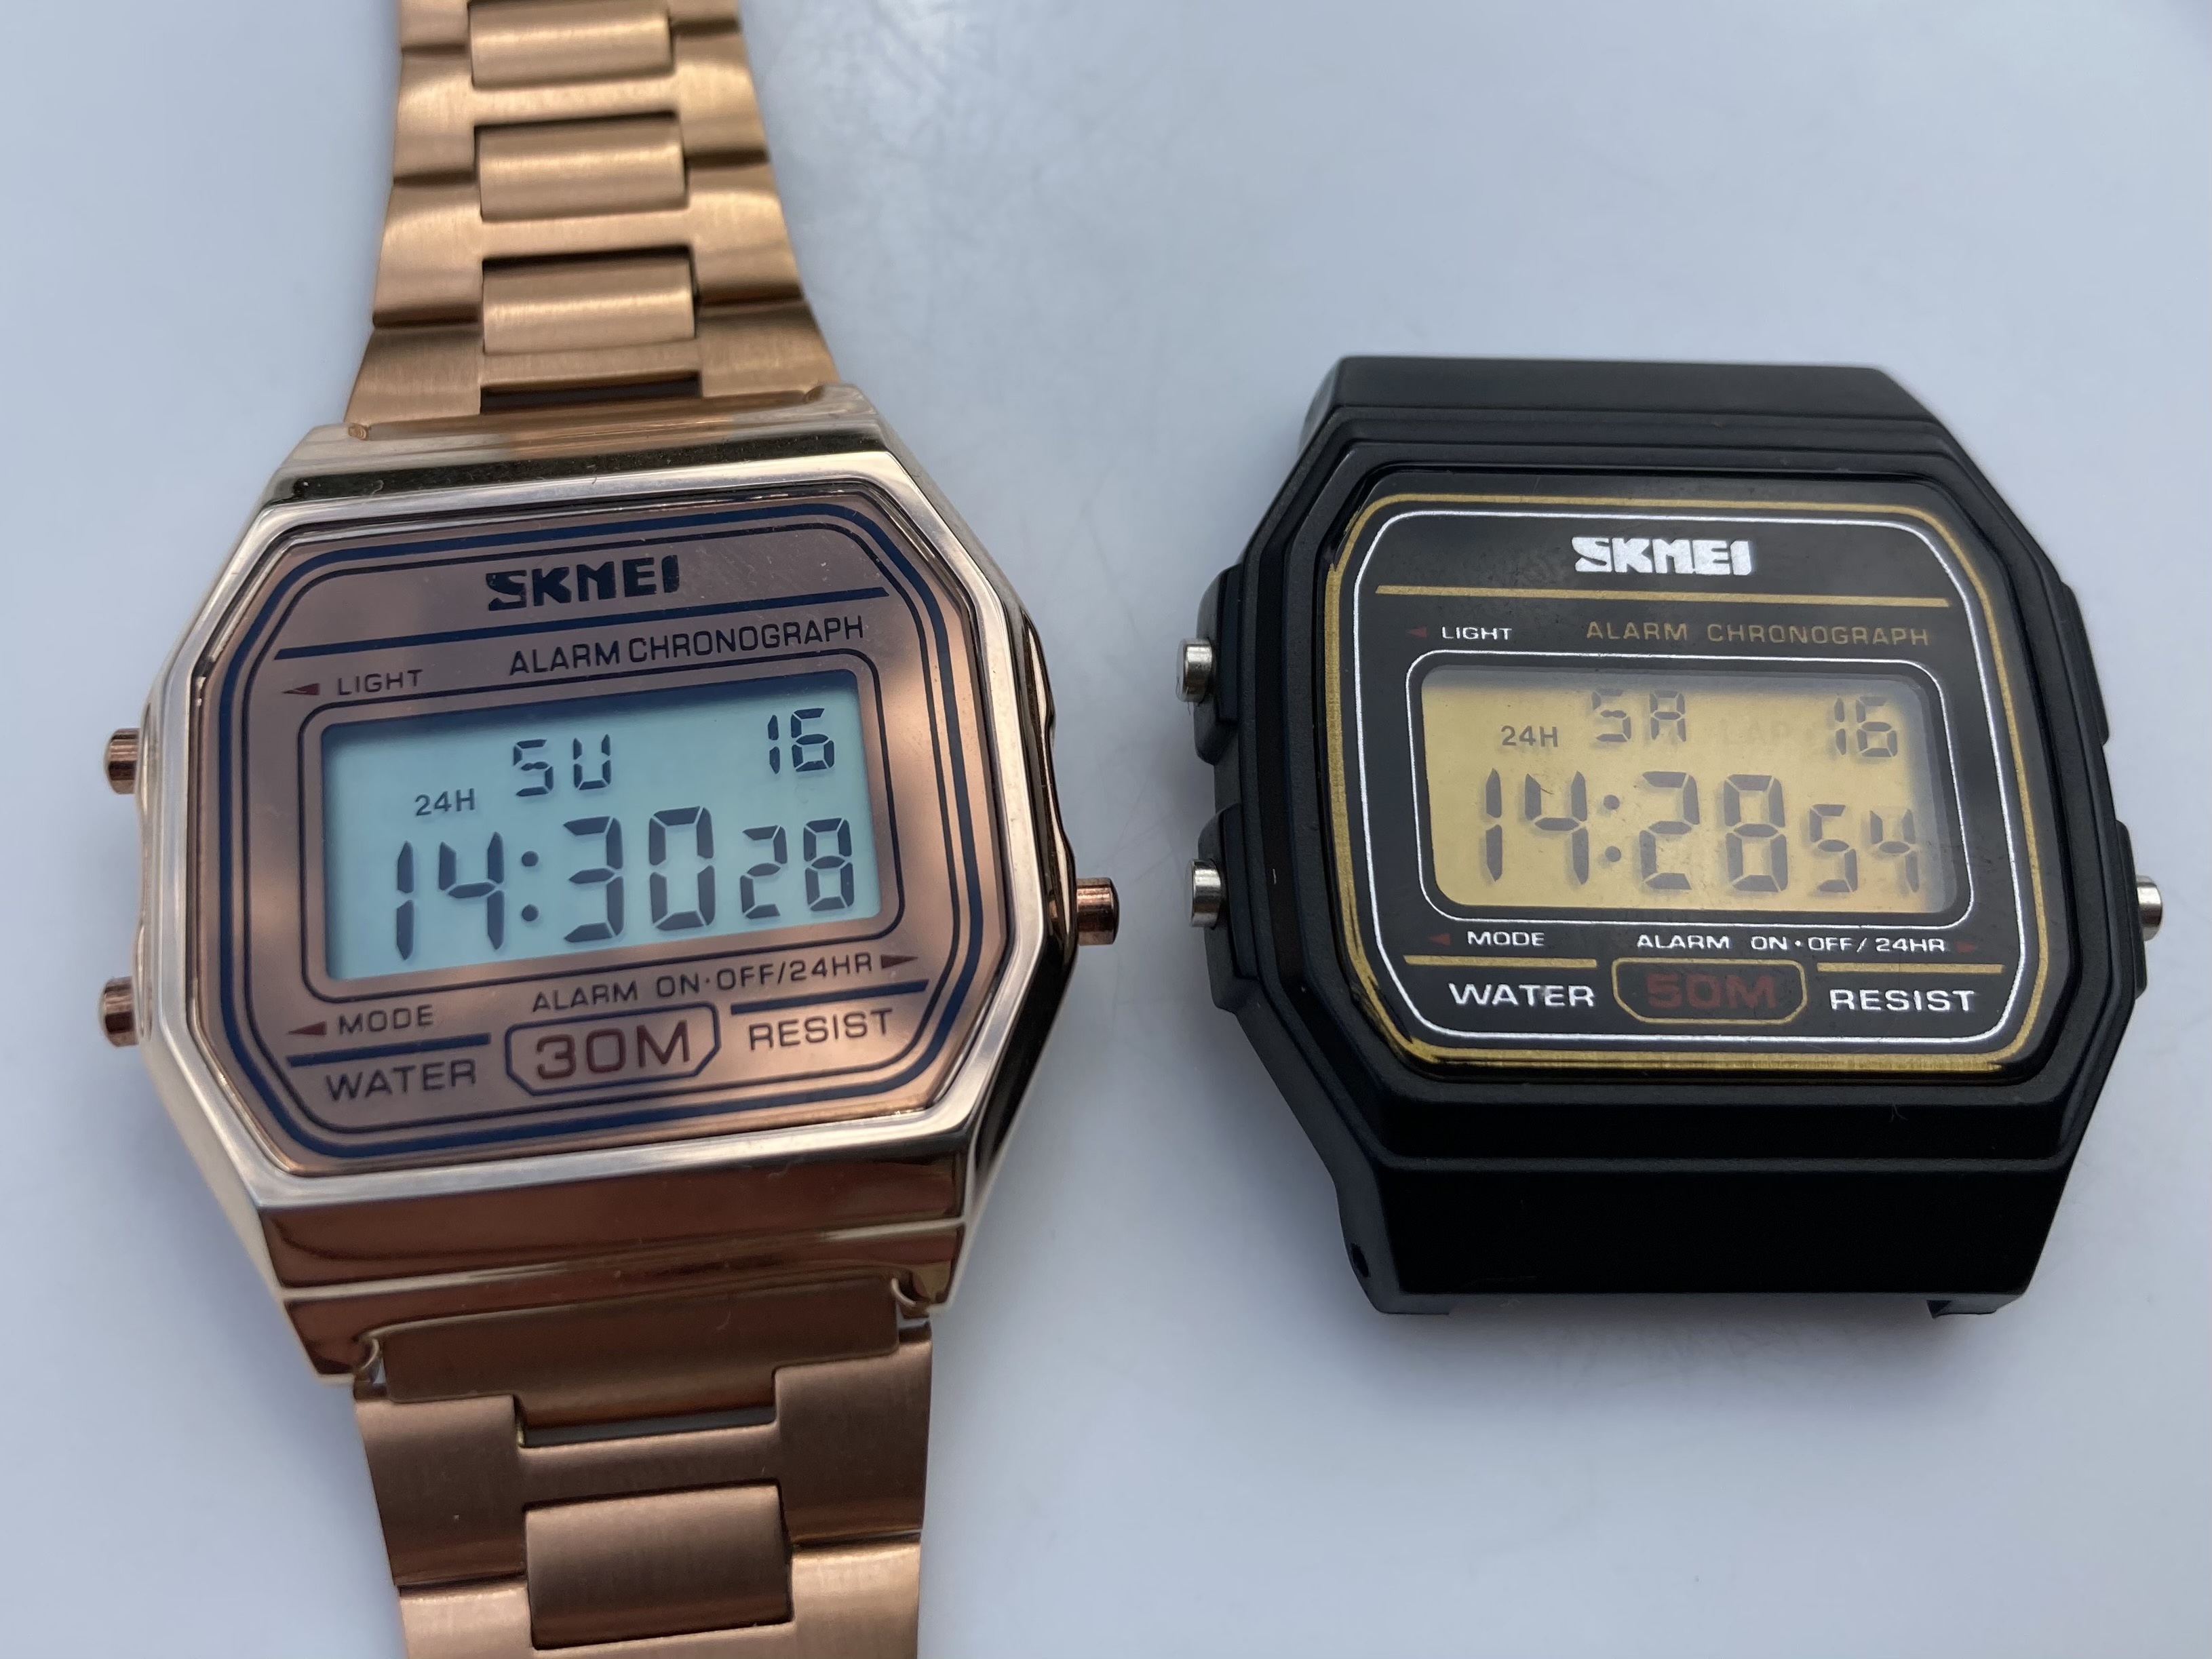 Skmei watches before swapping faces